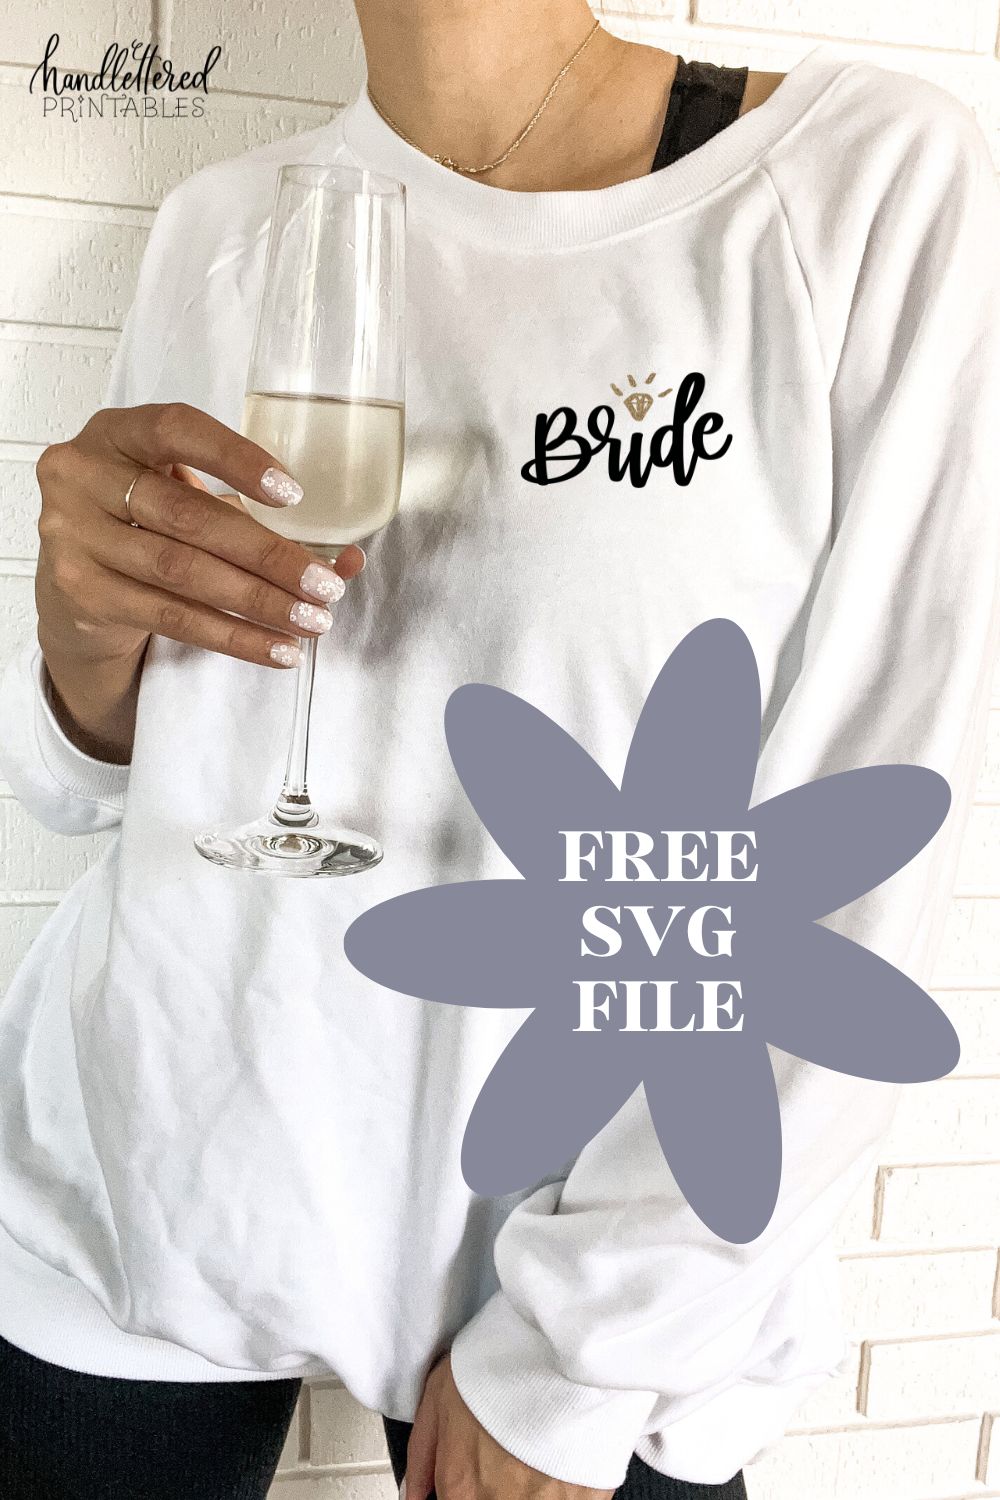 Free bride SVG for bridal party gifts!